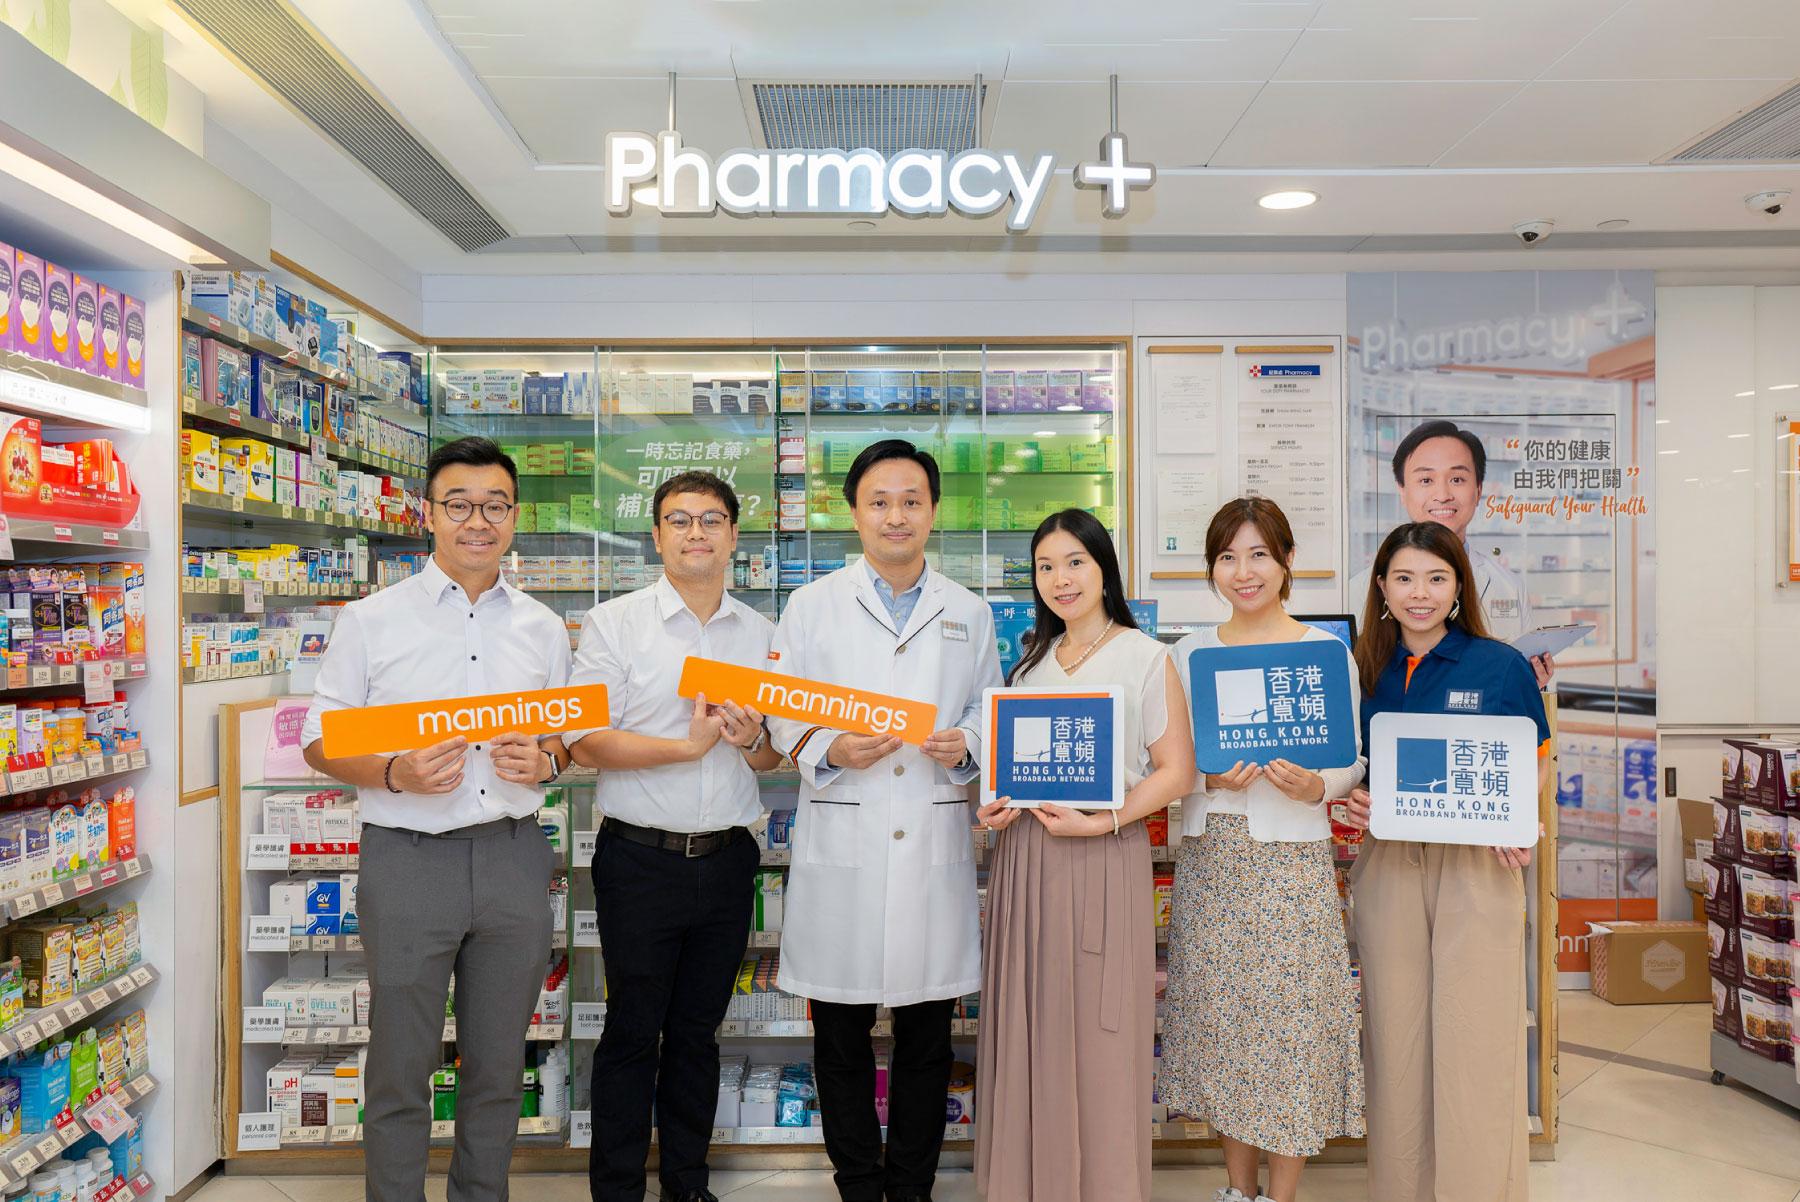 HKBN x Mannings Pioneer FREE Pharmacist Consultations for Talents